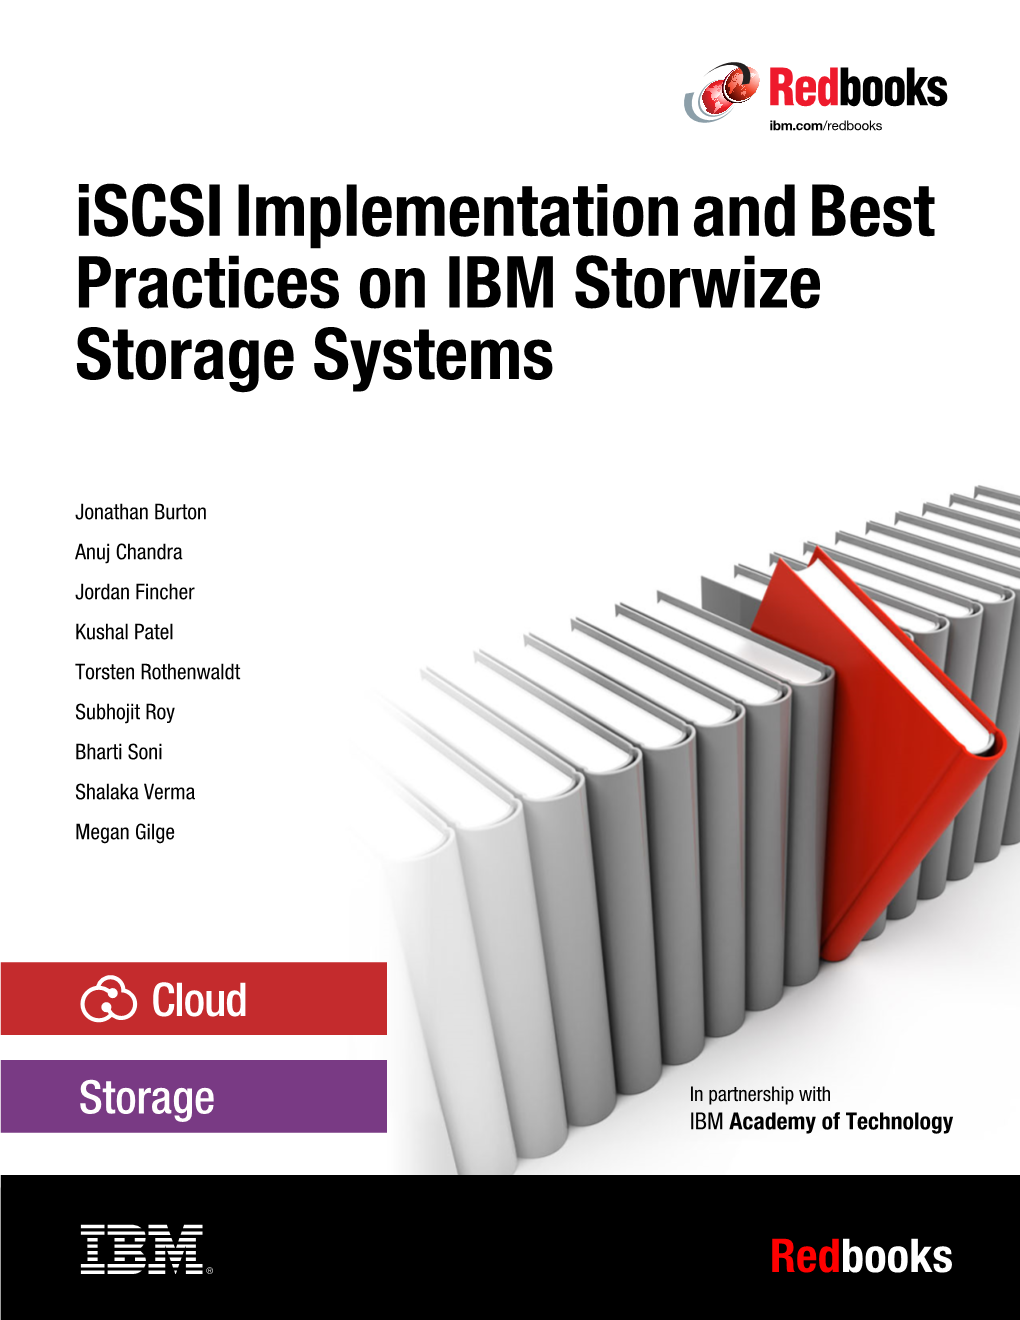 Iscsi Implementation and Best Practices on IBM Storwize Storage Systems